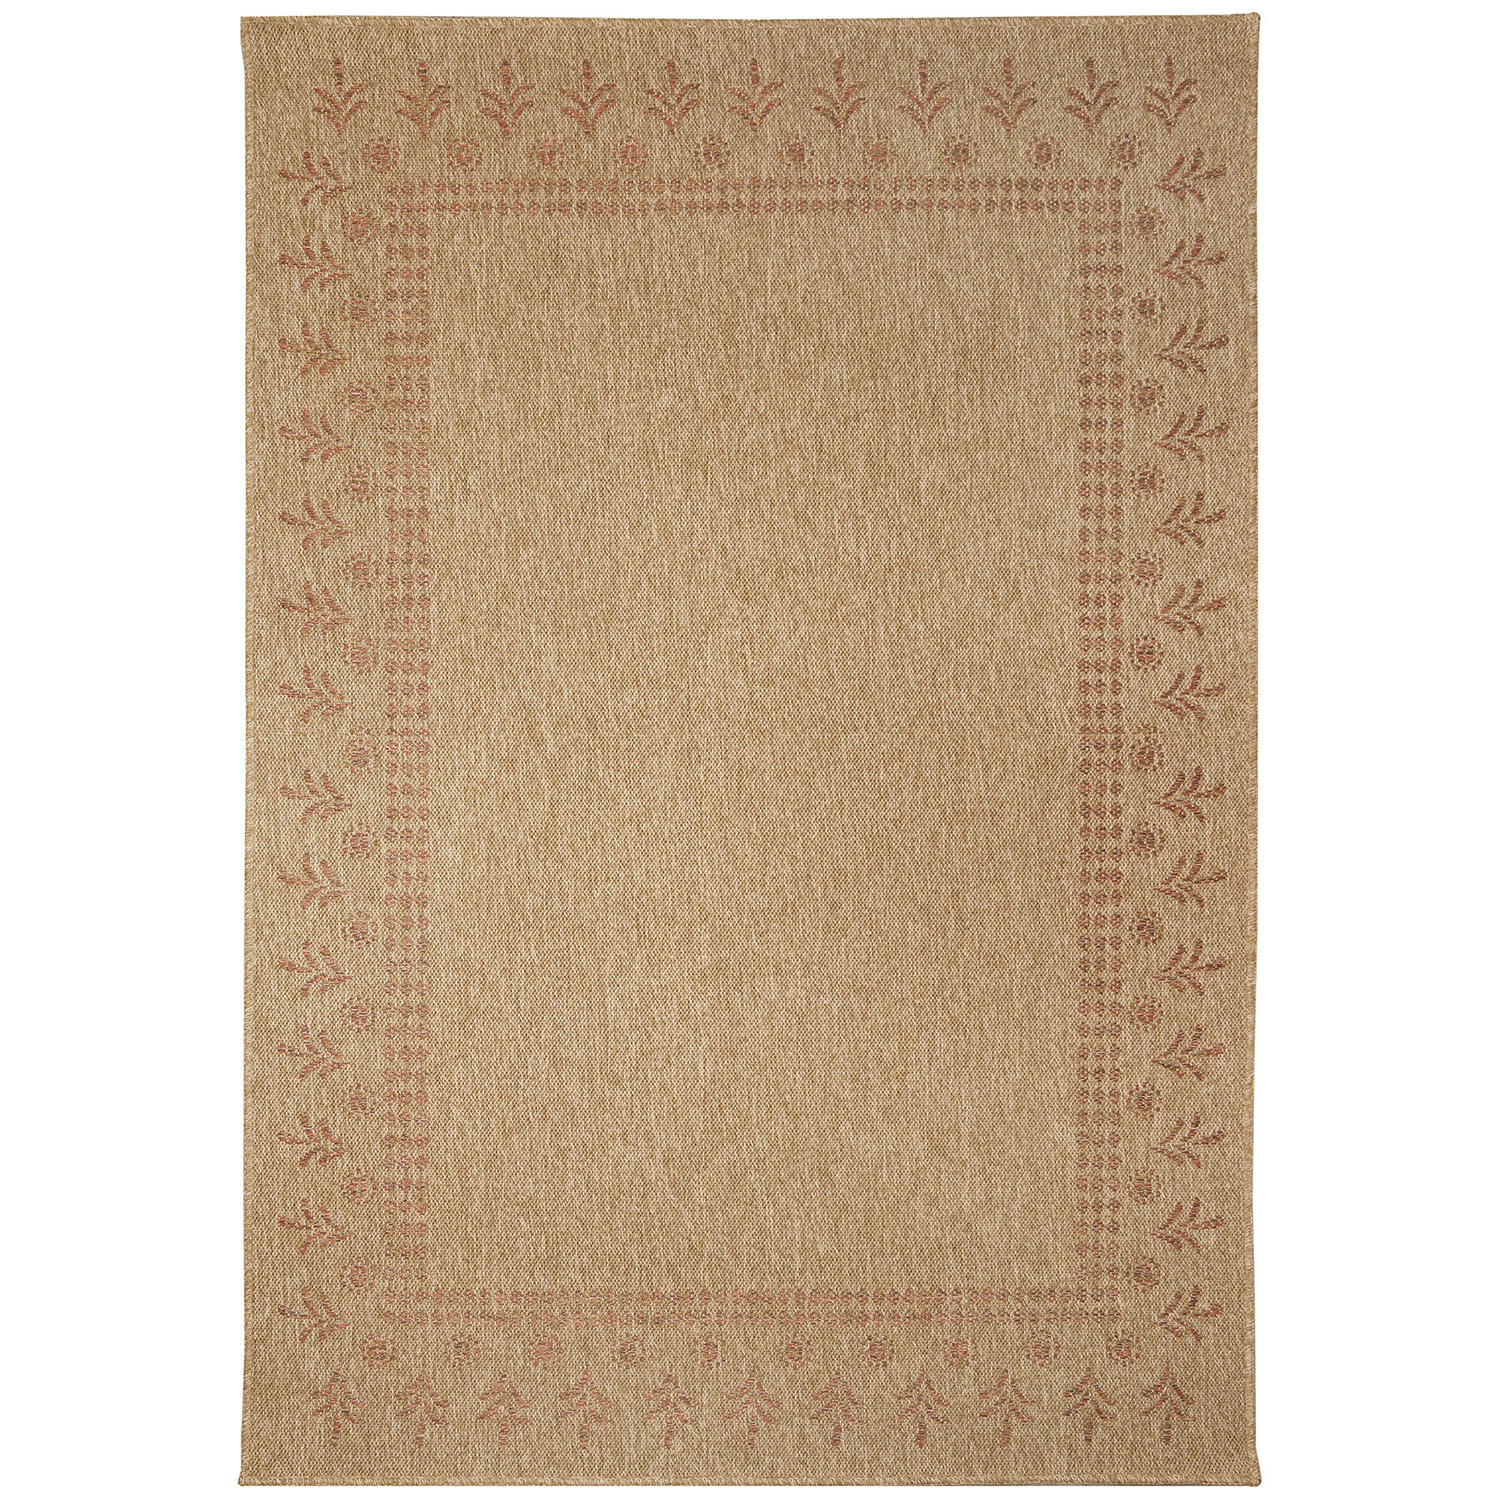 Liora Manne Sahara Low Profile  Easy Care Woven Weather Resistant Rug- Block Print Border Terracotta Product Image